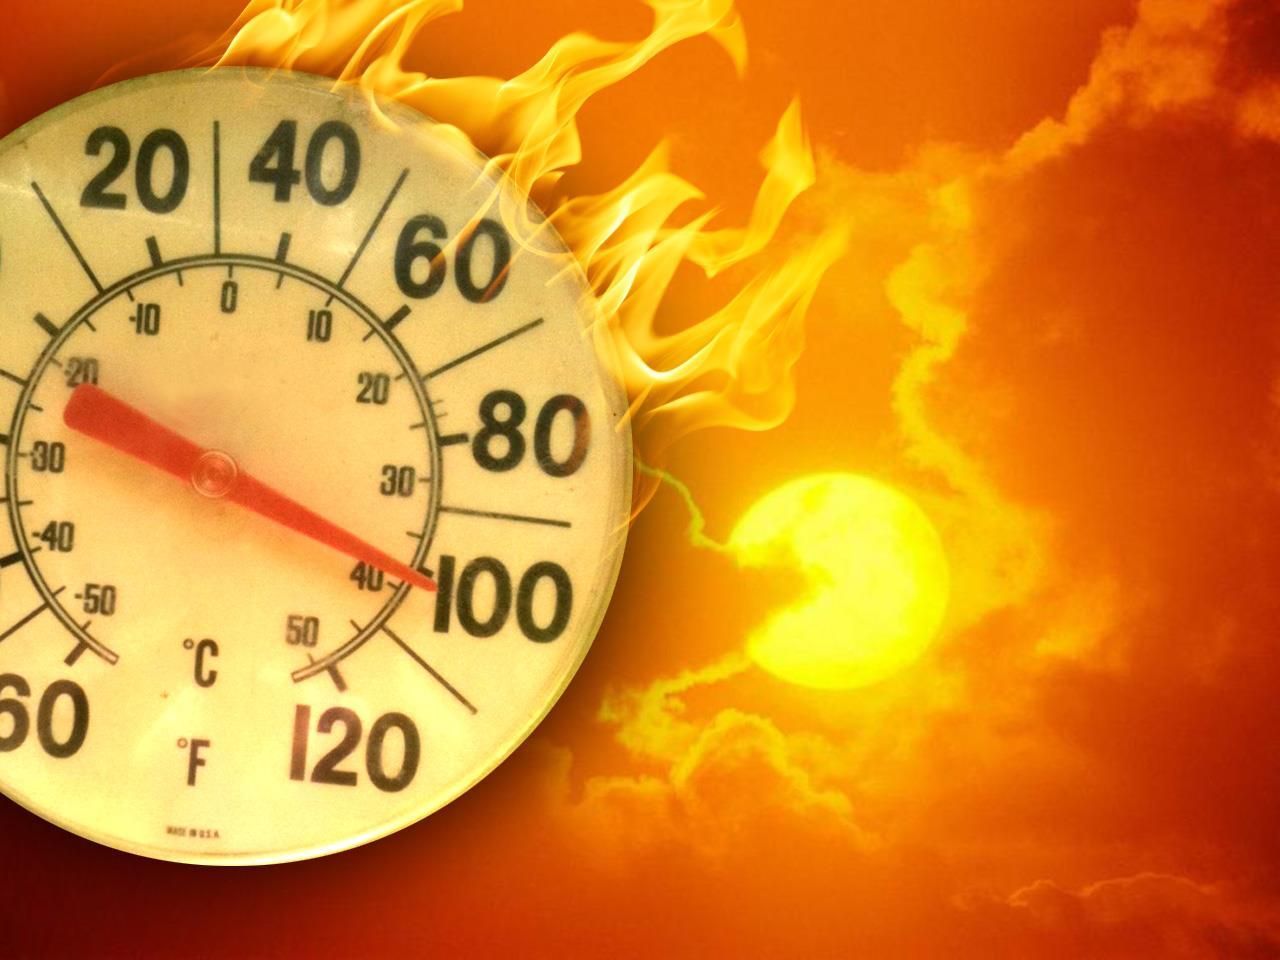 A thermometer shows a temperature of 120 degrees